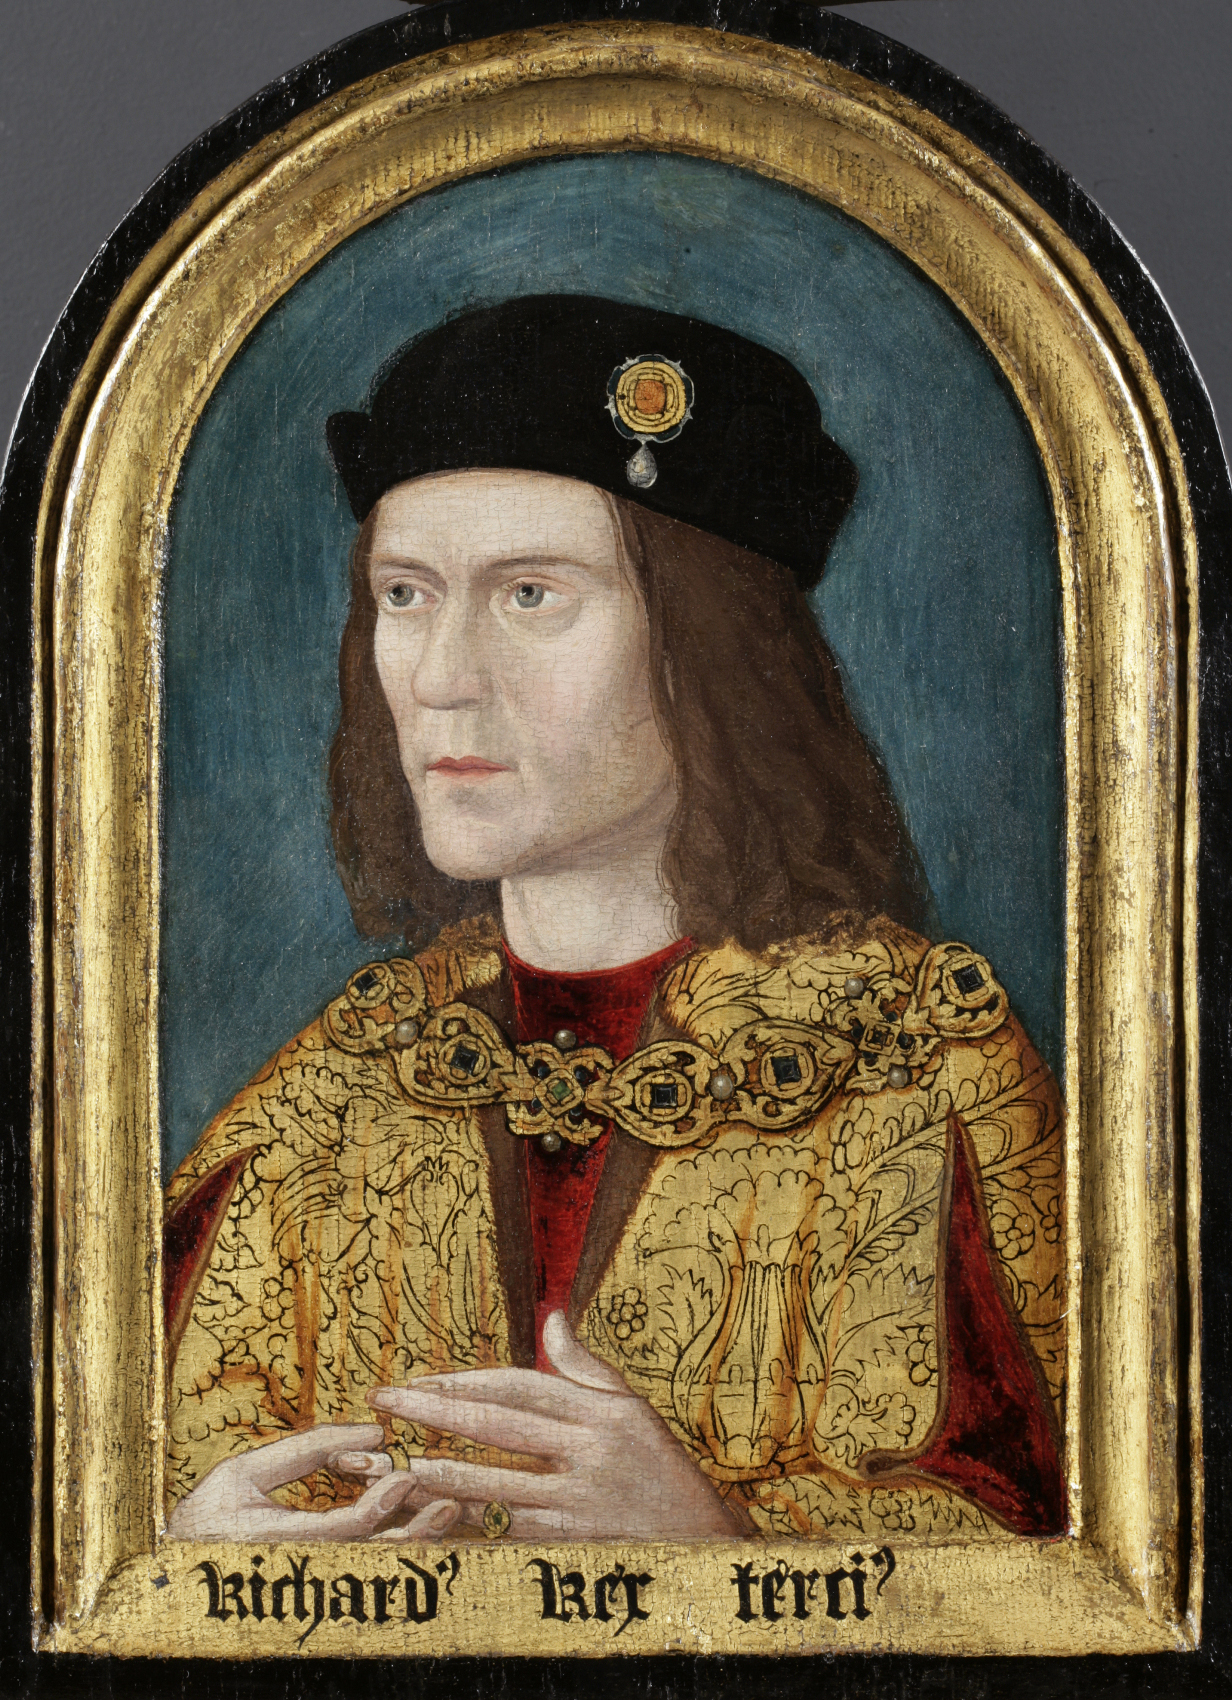 It’s Official: Skeleton Found Under Parking Lot Is Richard III